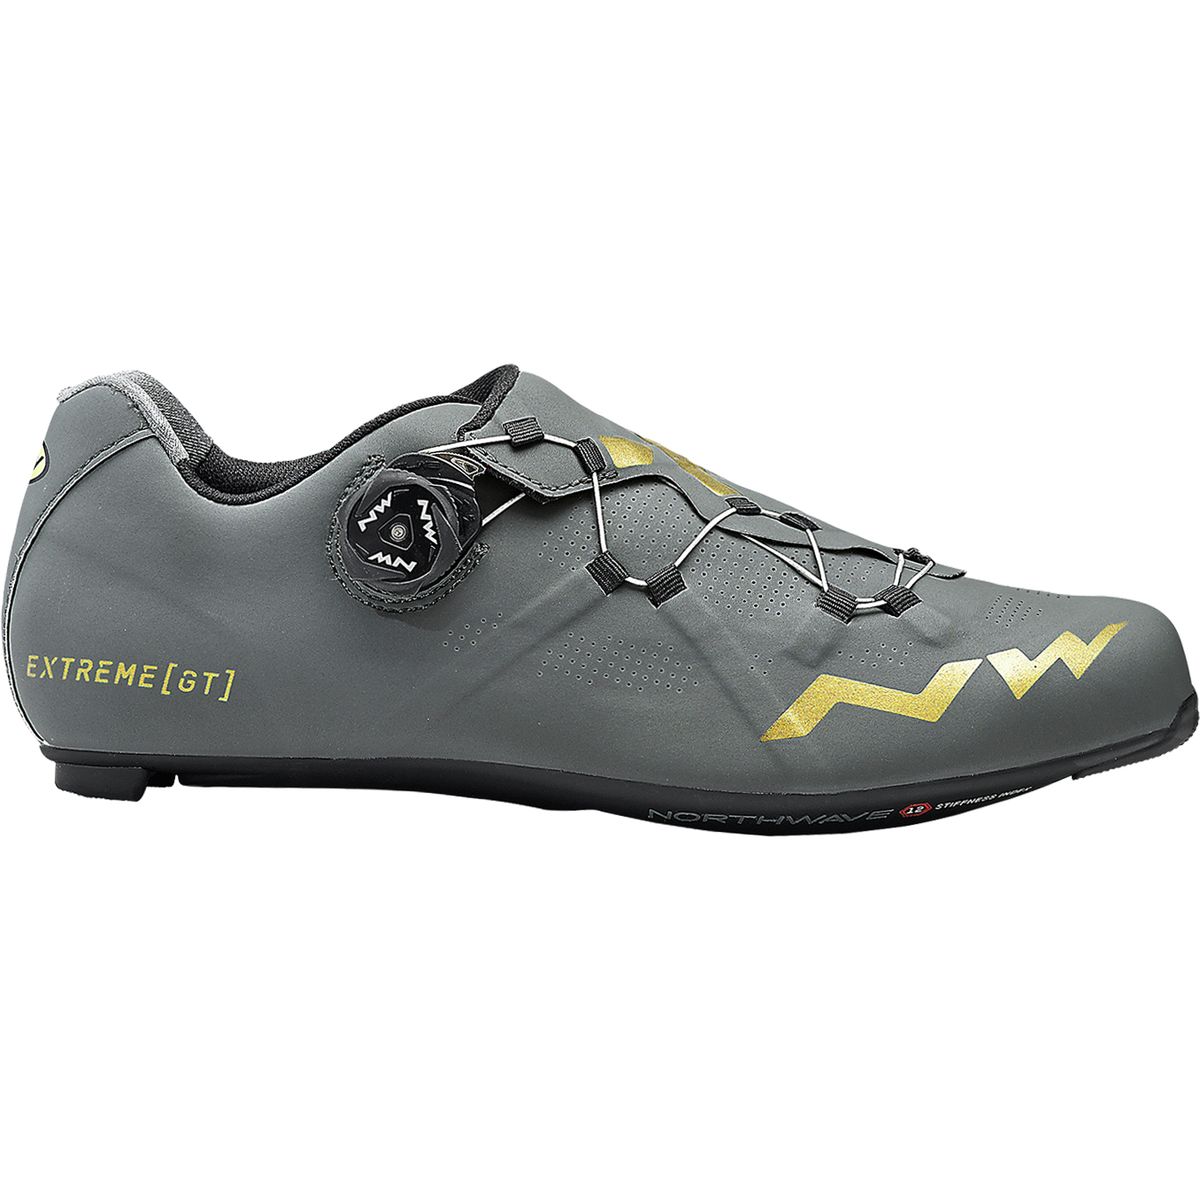 Northwave Extreme GT Cycling Shoe - Men's